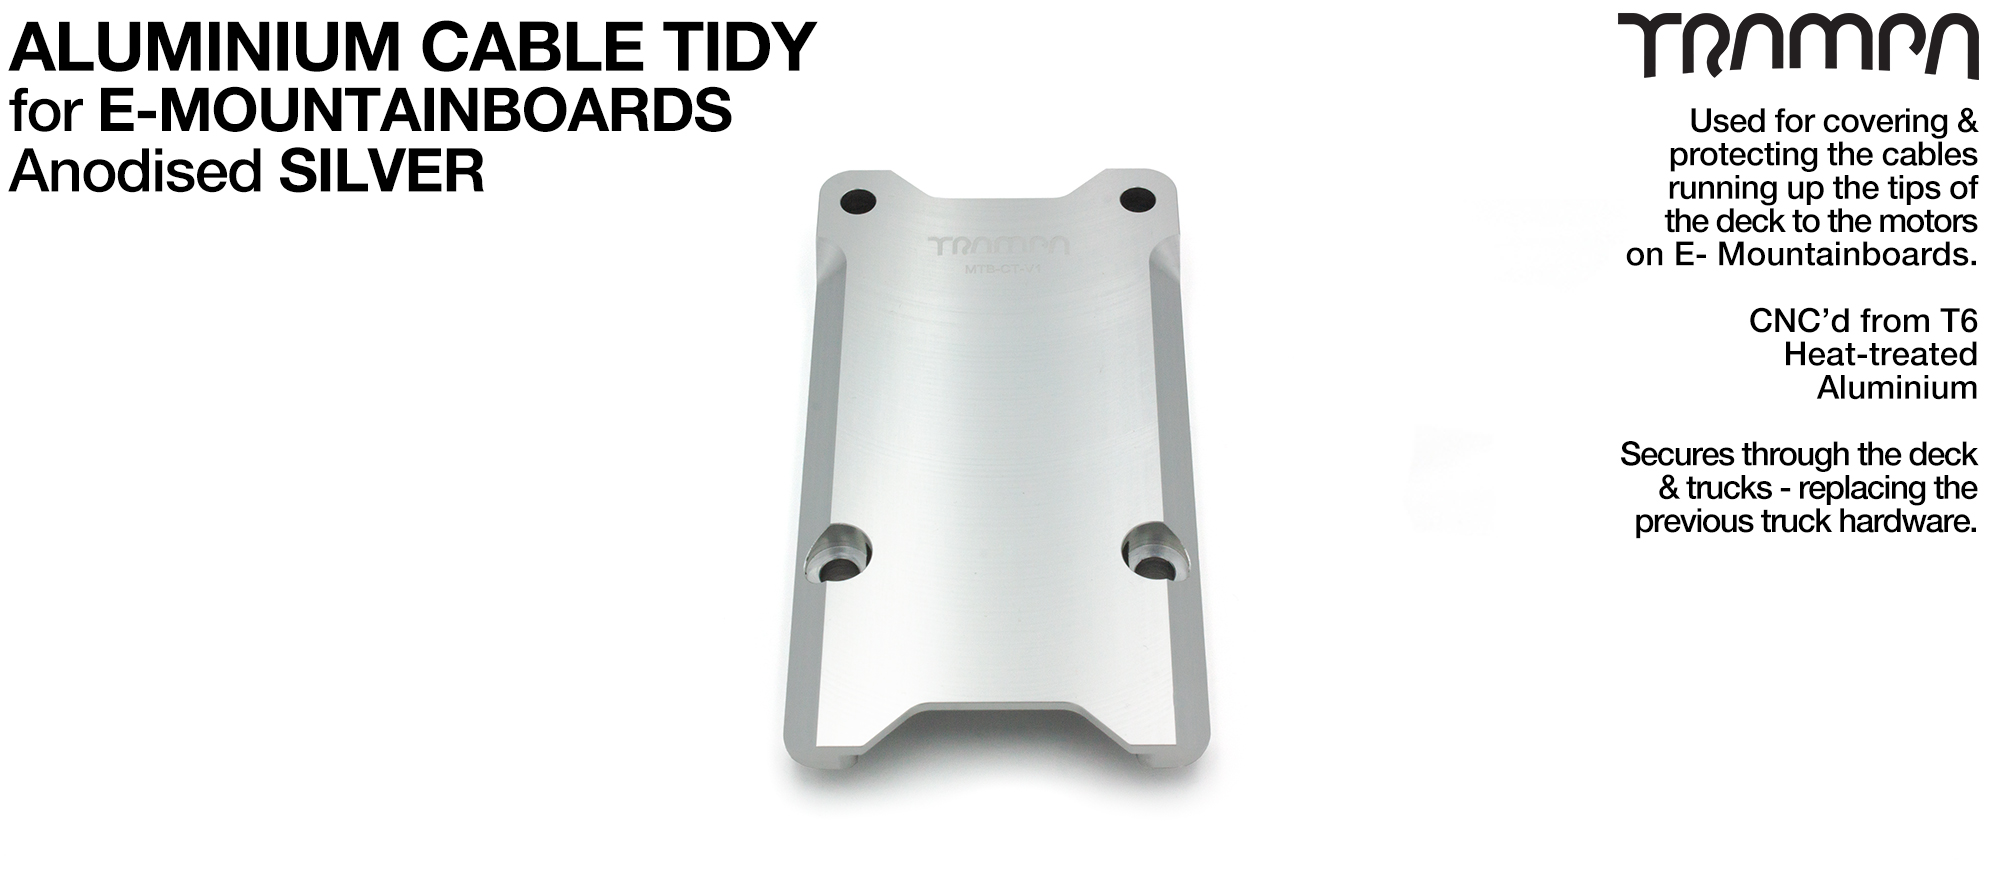 Anodised Aluminum Cable Tidy - SILVER V1